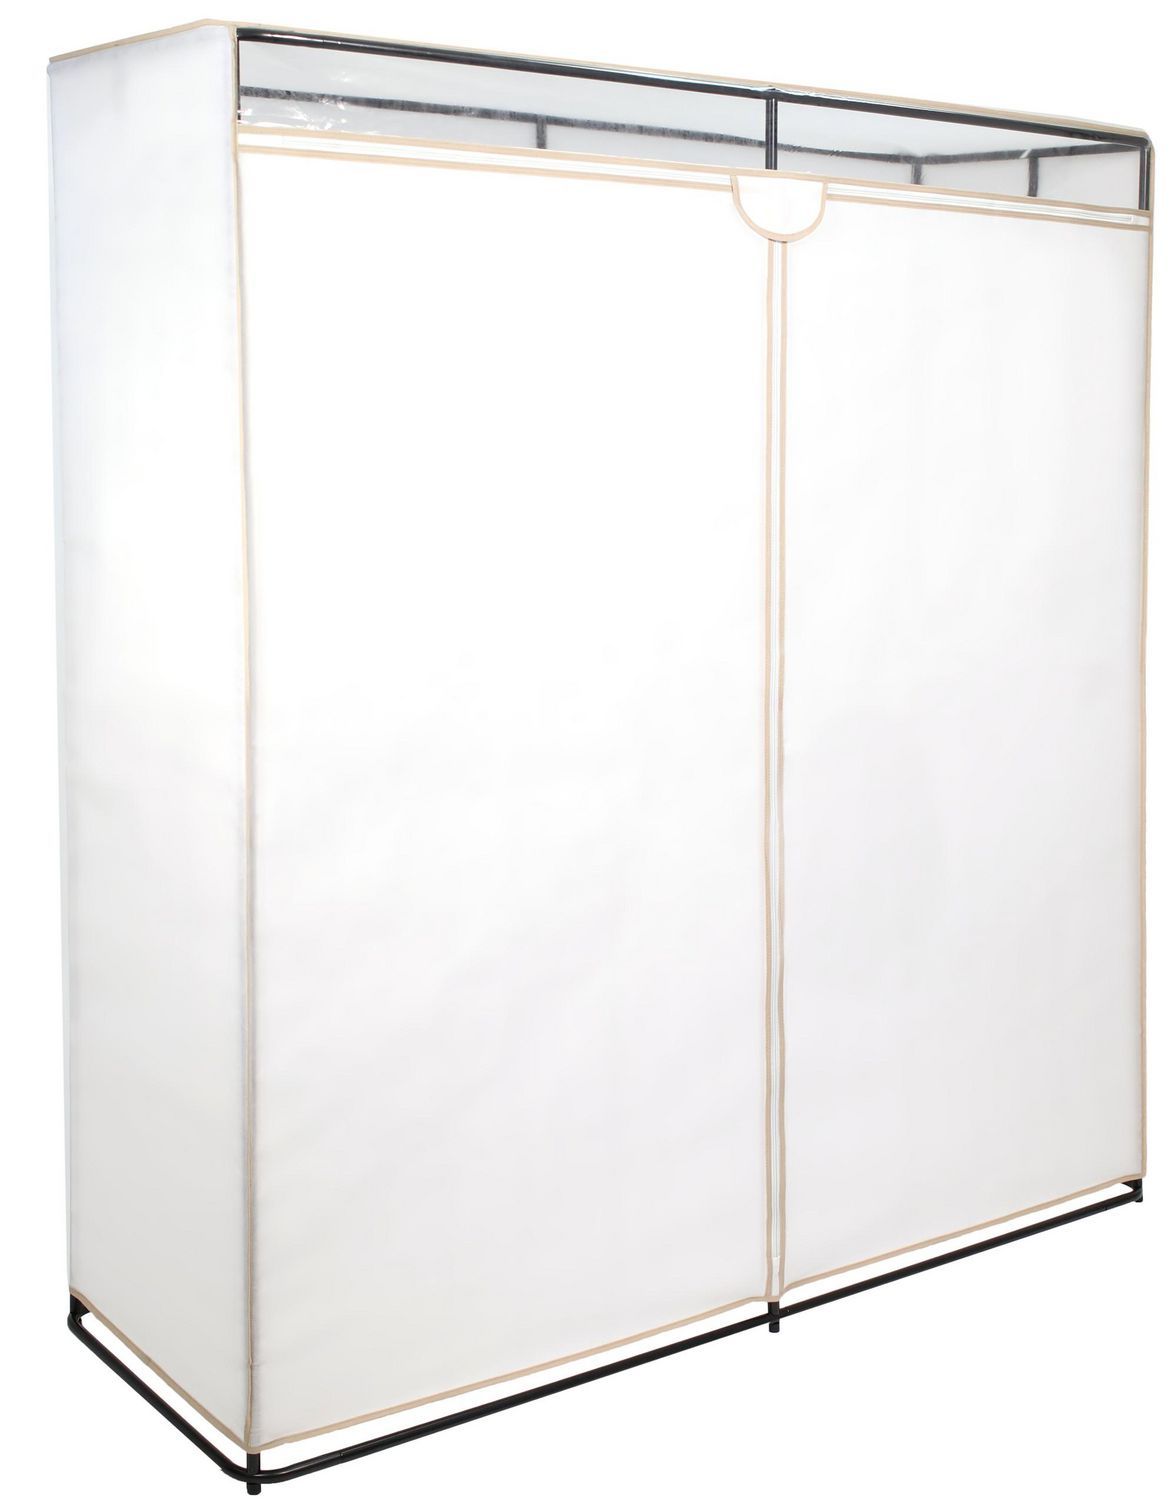 Tidyliving Extra Wide Single Tier Zippered Clothes Closet, 60" | Walmart  Canada Throughout Single Tier Zippered Wardrobes (View 8 of 15)